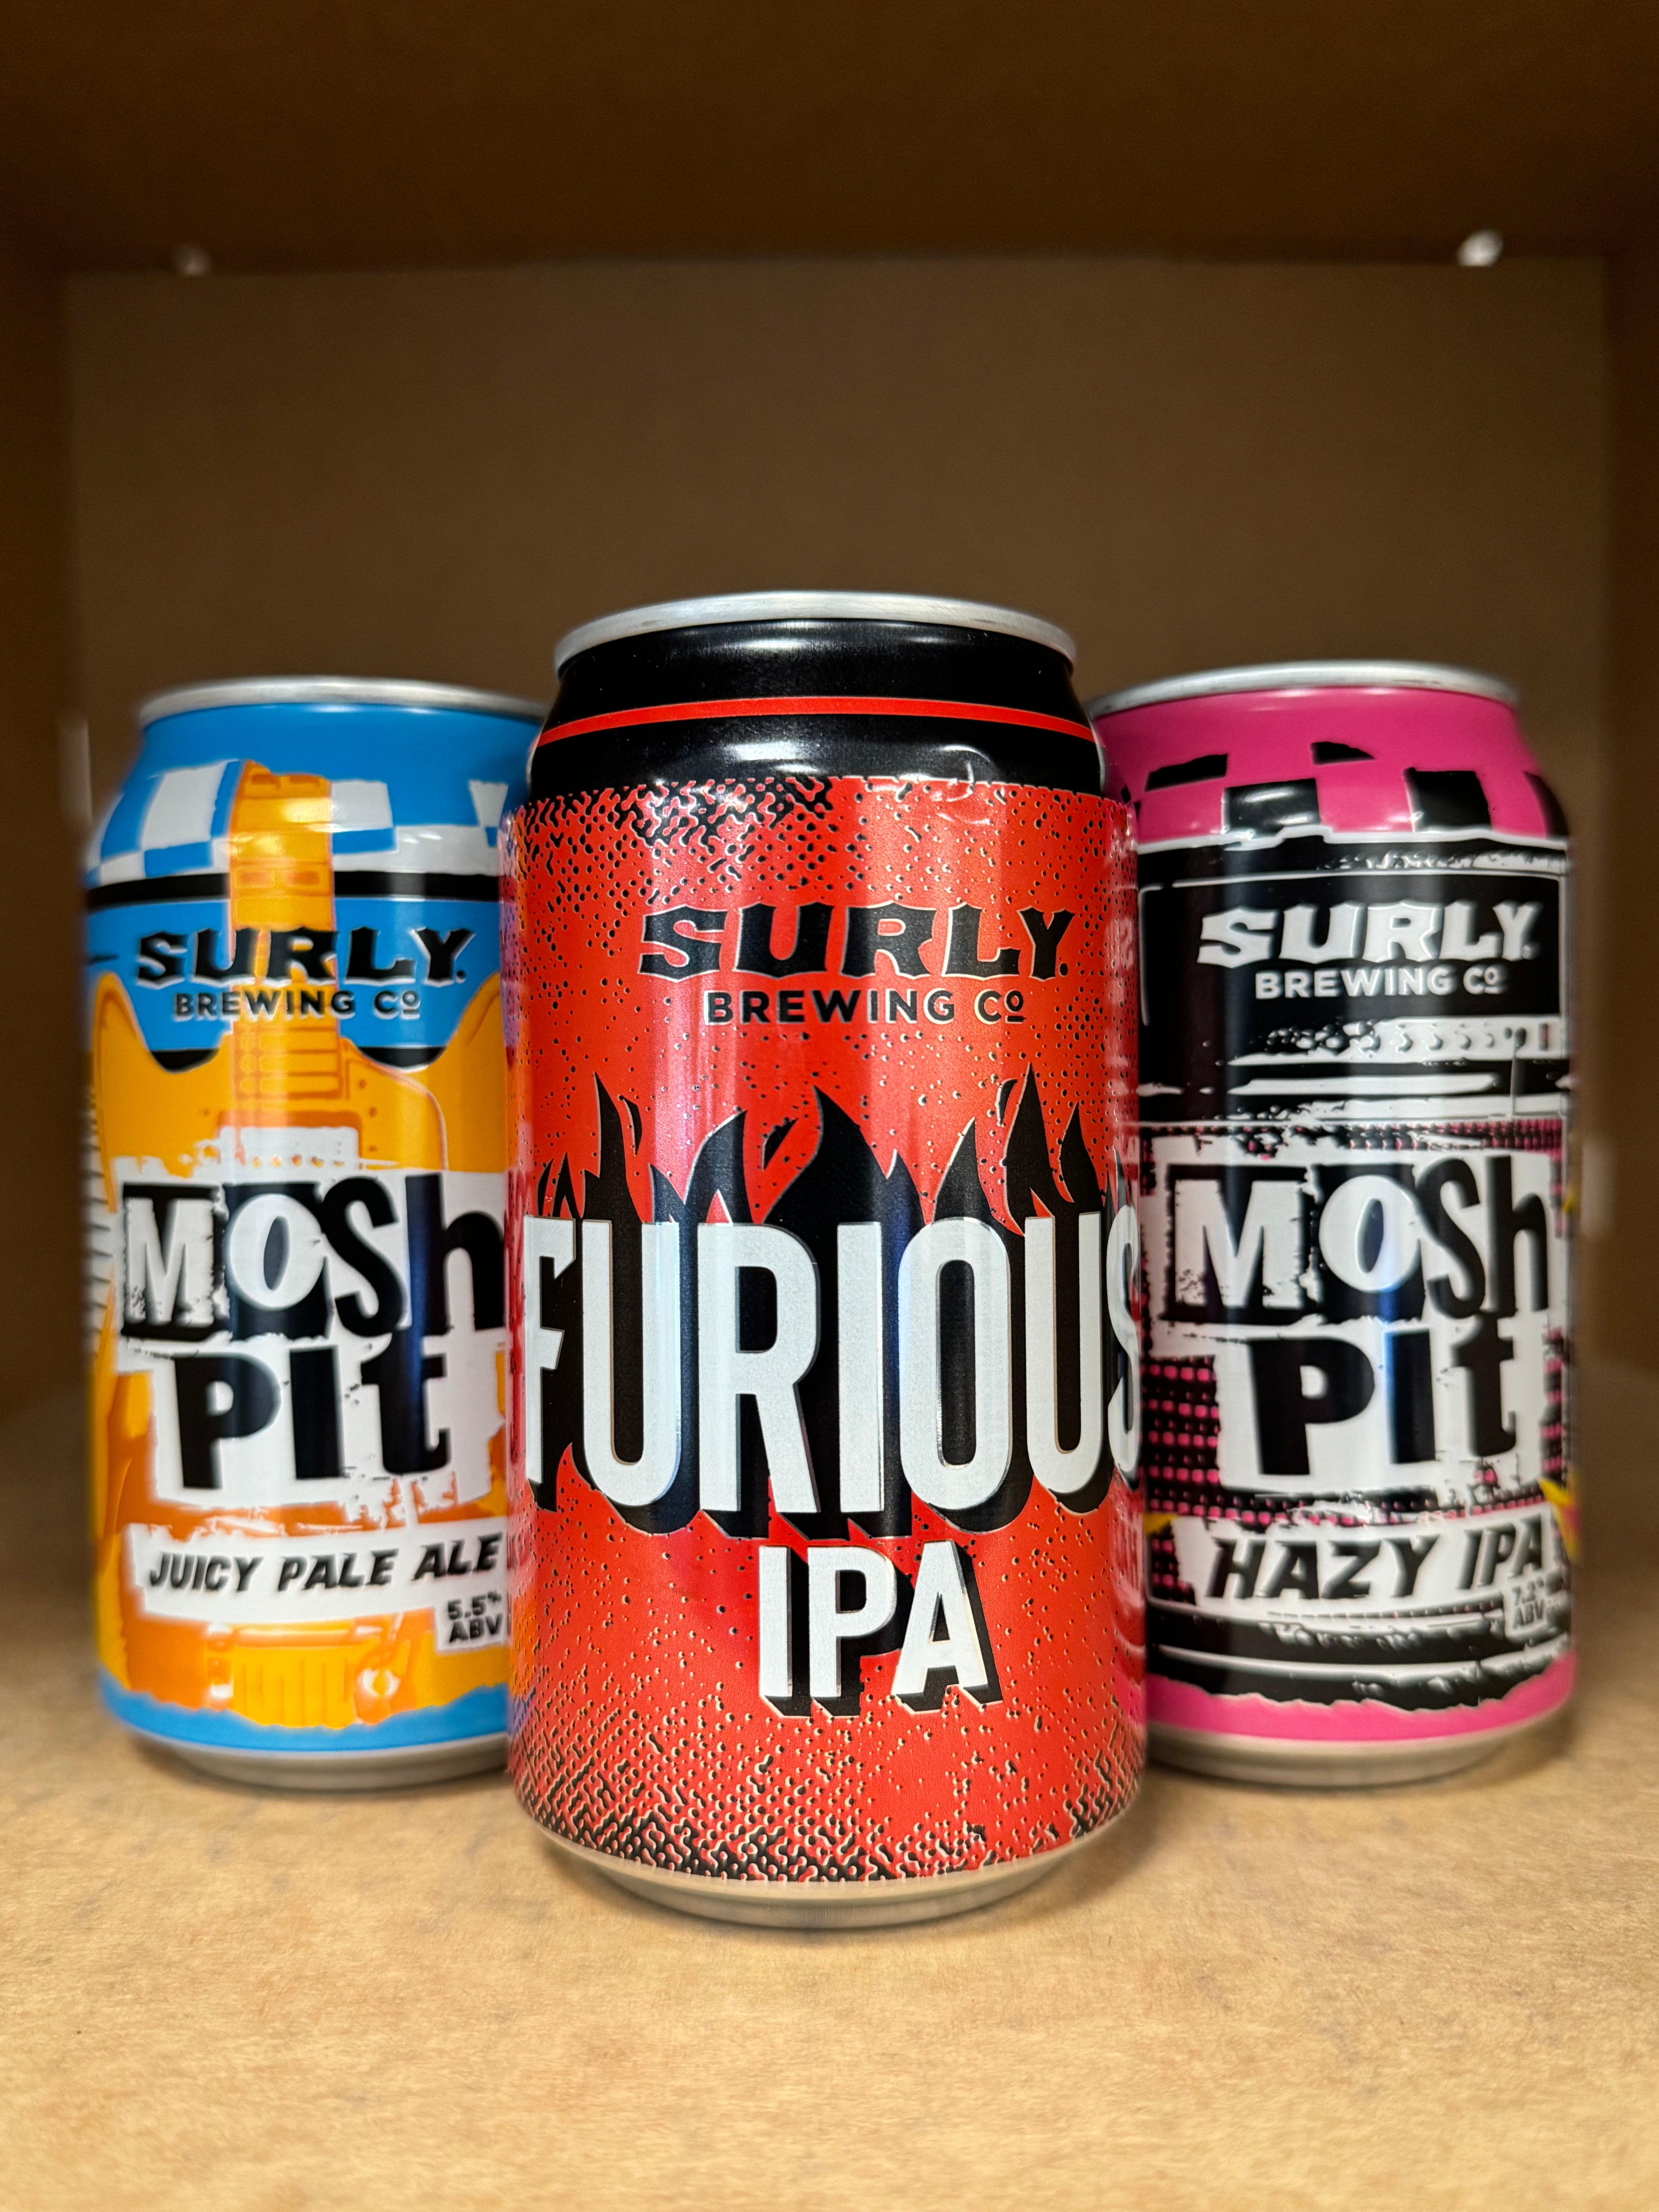 -Surly- Surly 🚀 Take Off Set 1-Packs & Cases- Only @ Beer Republic - The best online beer store for American & Canadian craft beer - Buy beer online from the USA and Canada - Bier online kopen - Amerikaans bier kopen - Craft beer store - Craft beer kopen - Amerikanisch bier kaufen - Bier online kaufen - Acheter biere online - IPA - Stout - Porter - New England IPA - Hazy IPA - Imperial Stout - Barrel Aged - Barrel Aged Imperial Stout - Brown - Dark beer - Blond - Blonde - Pilsner - Lager - Wheat - Weizen - 